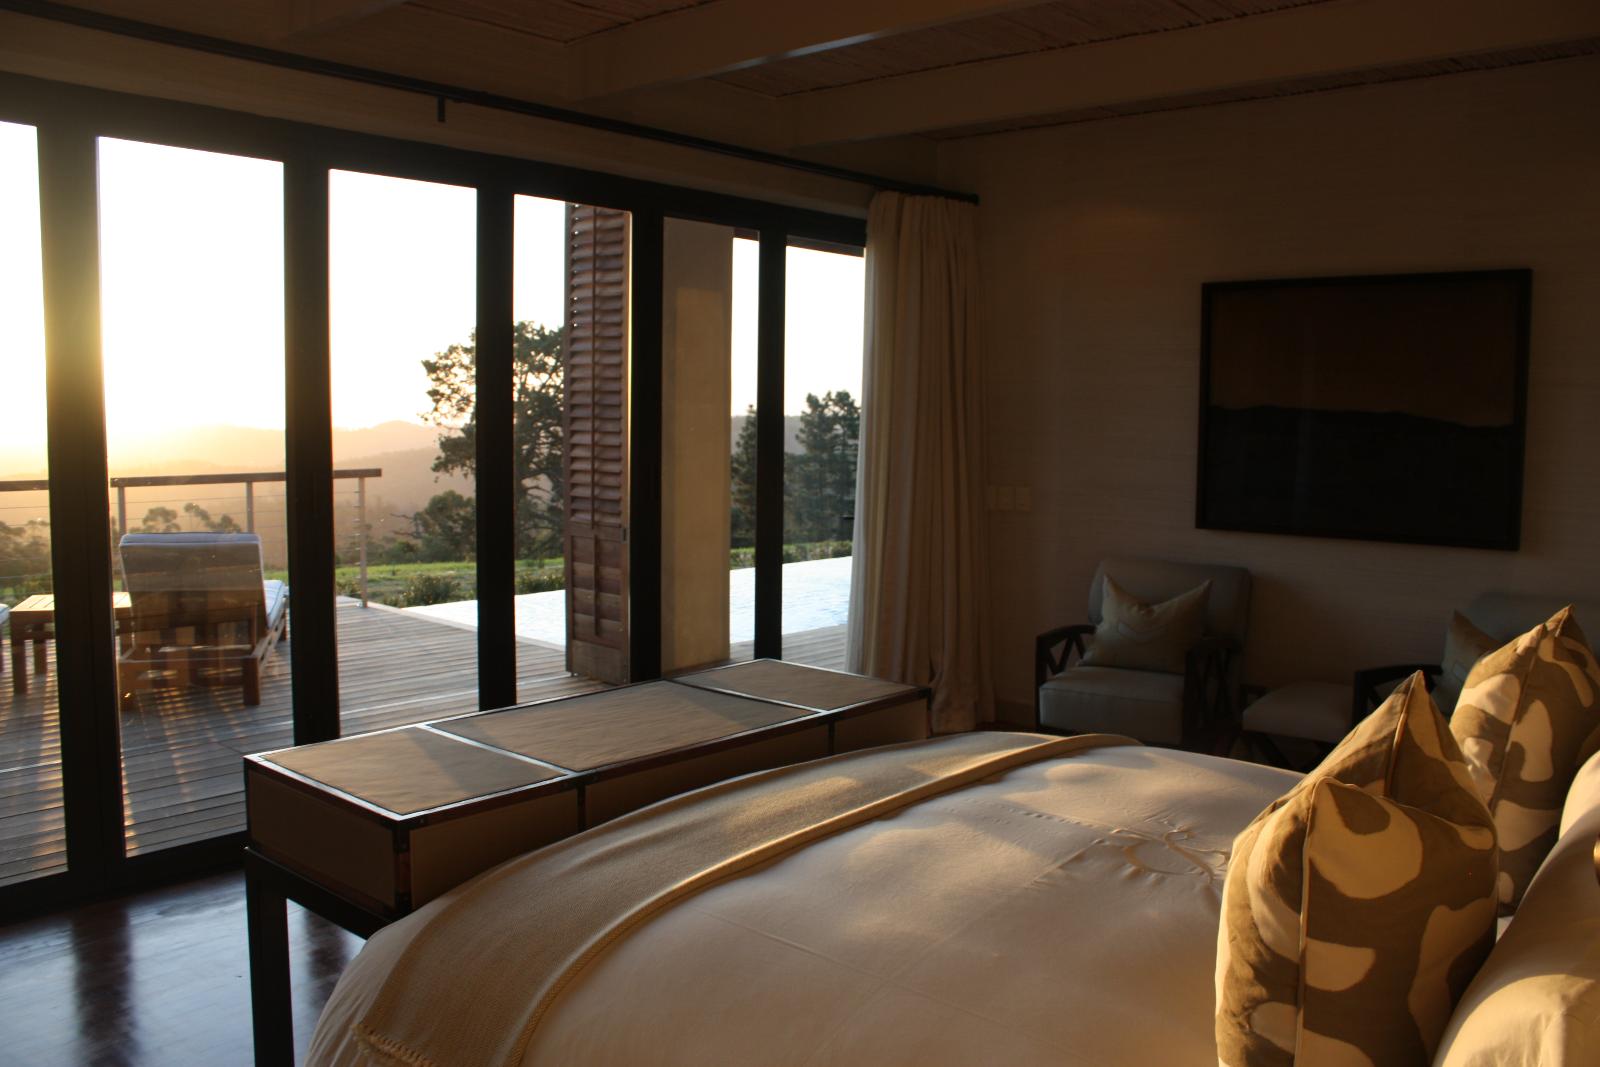 Owner's Lodge Bedroom with View - Delaire Graff Estate